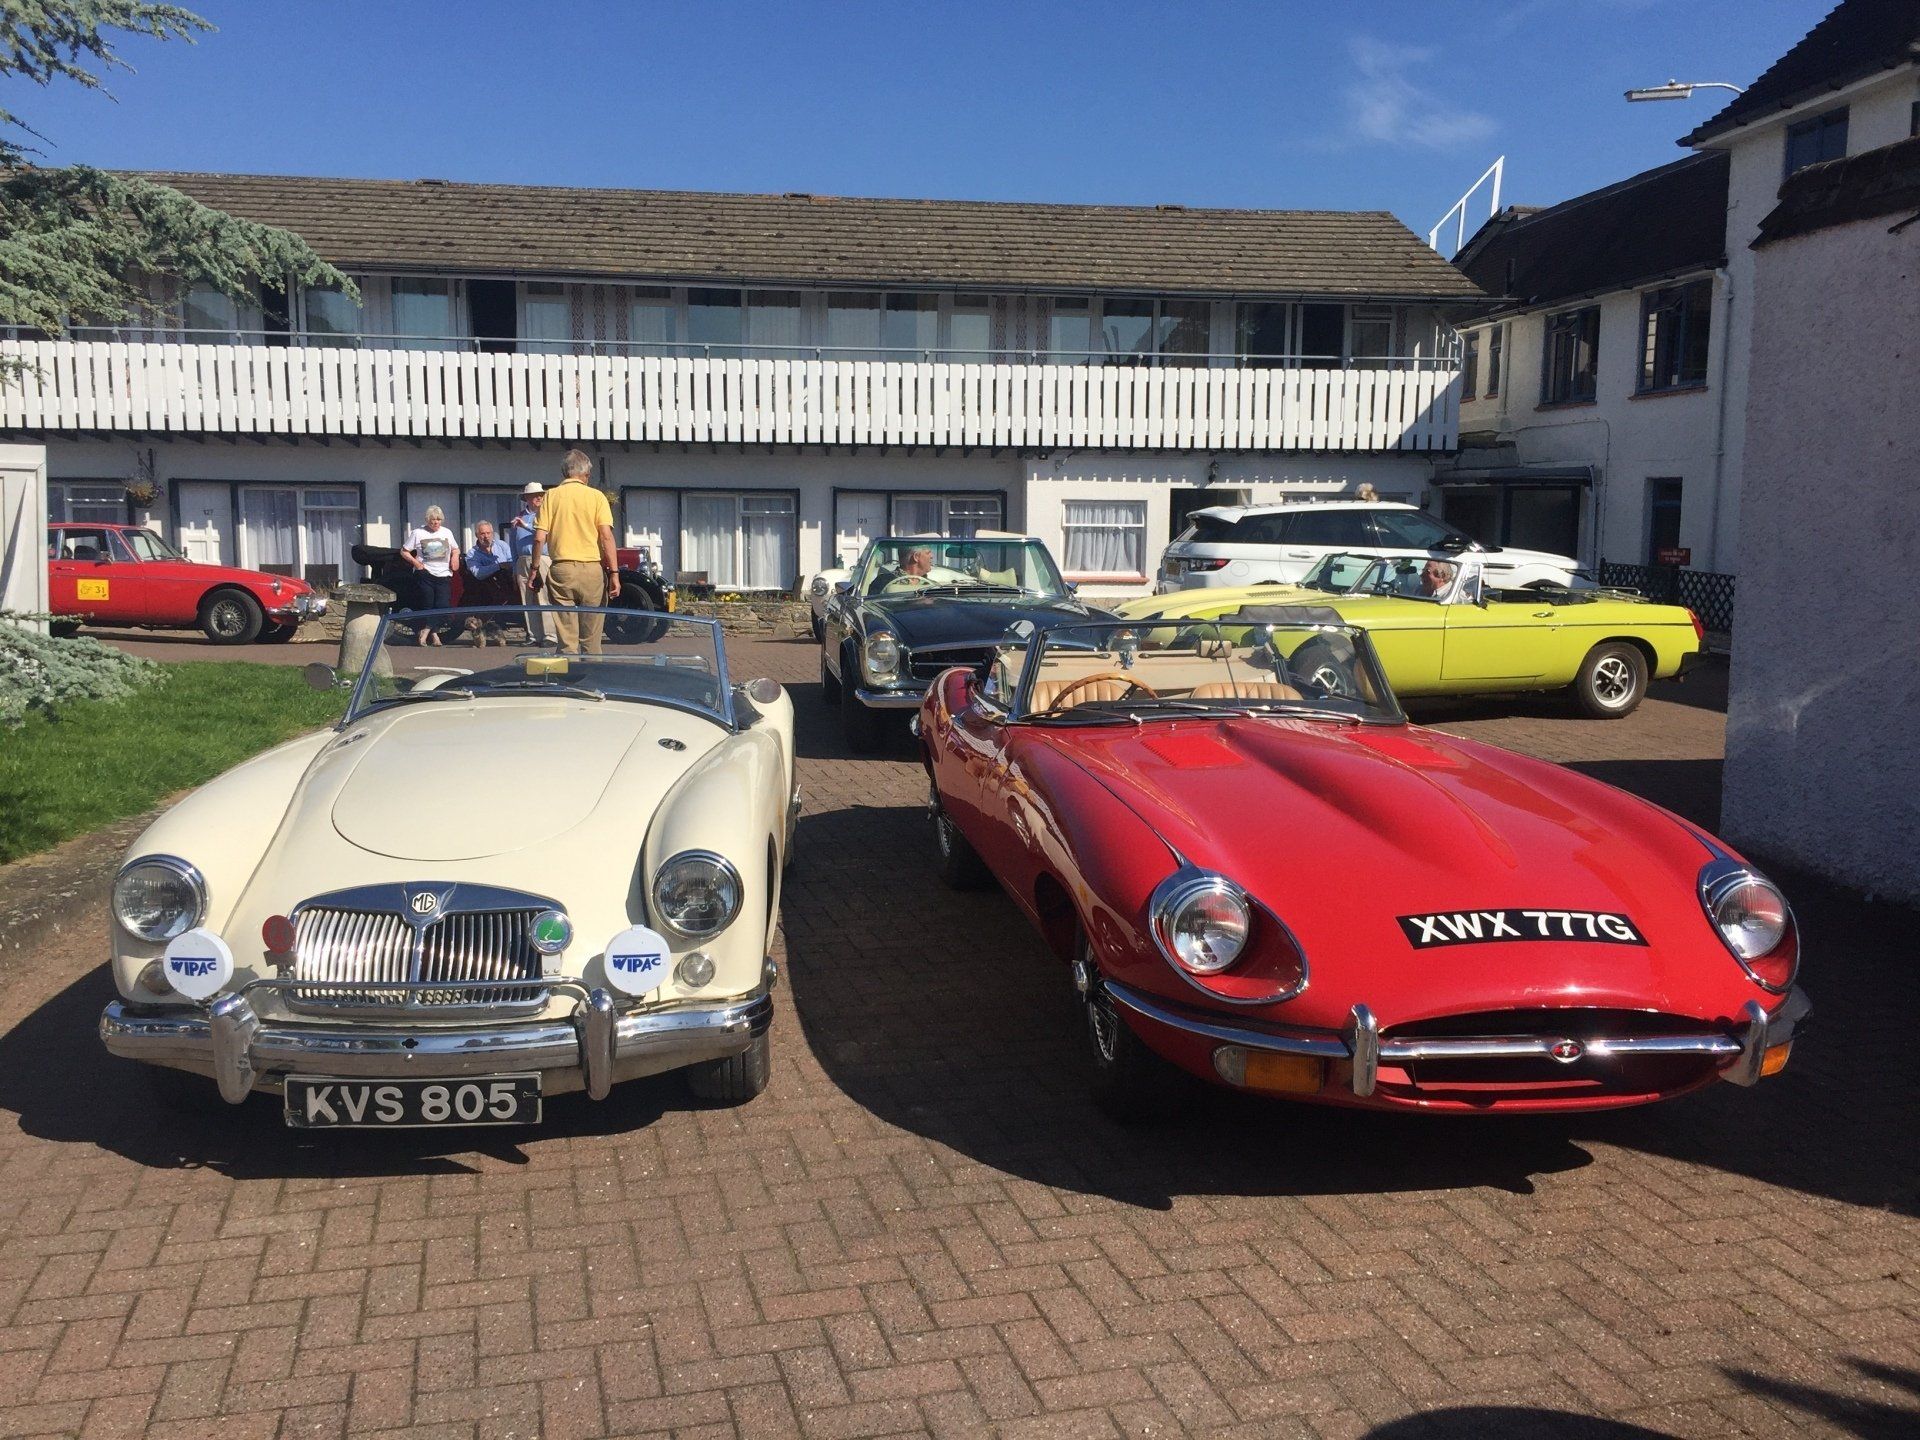 Additional images of members' Classic Cars in a variety of locations.